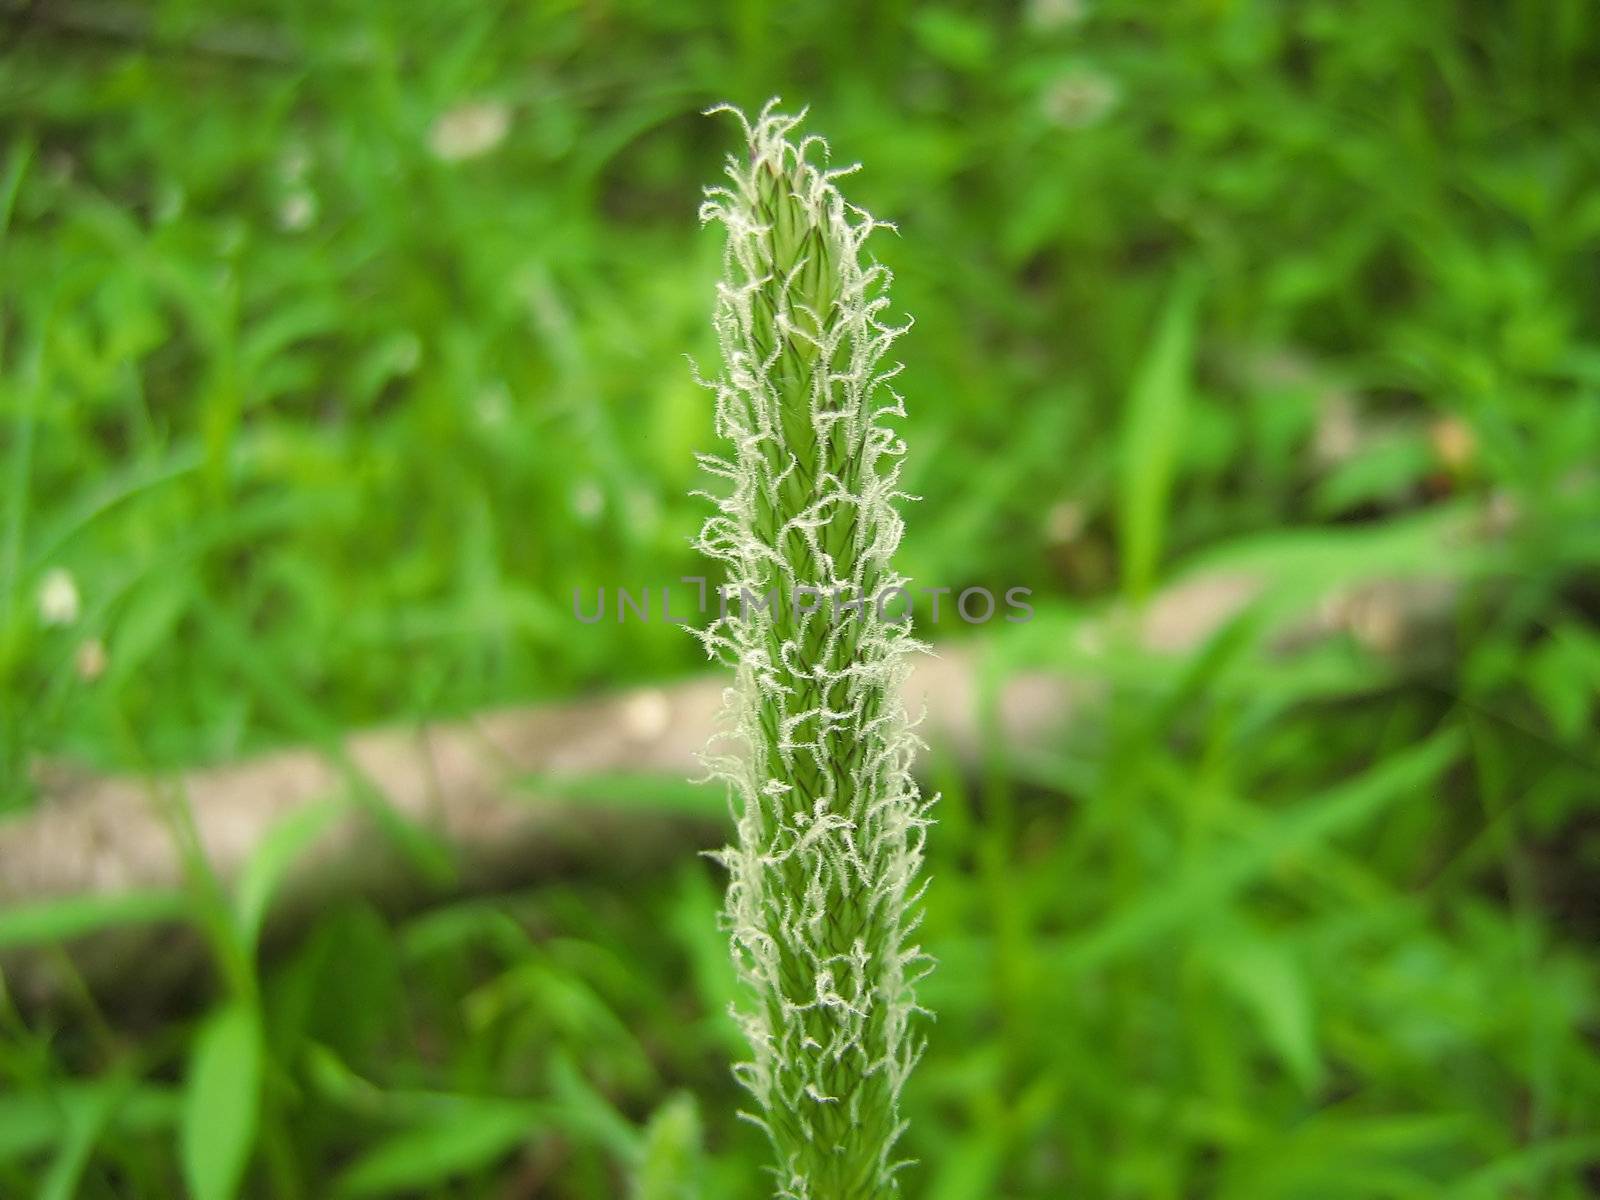 This a photograph of a Meadow Foxtail flower. The Meadow Foxtail is a perennial plant of the grass family Poaceae. Native to Europe and Asia, it was introduced into the United States and southern Canada as a pasture grass for cattle. Habitats include fields, roadsides, and the margins of seasonal wetlands where there is little flooding. 